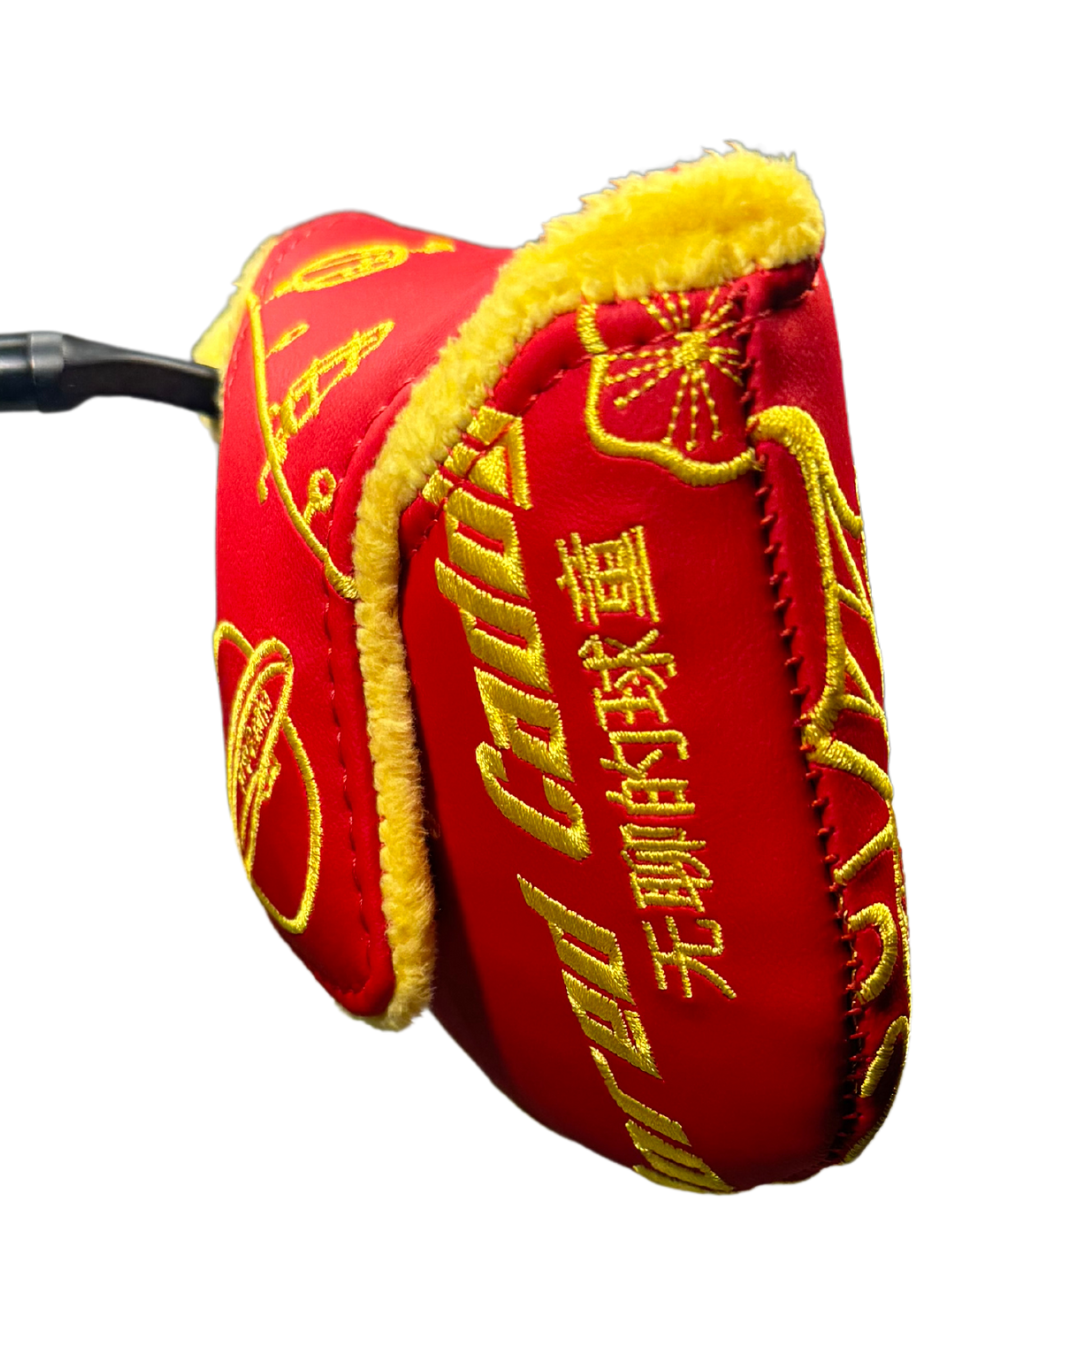 Bored Caddy Mallet CNY Limited